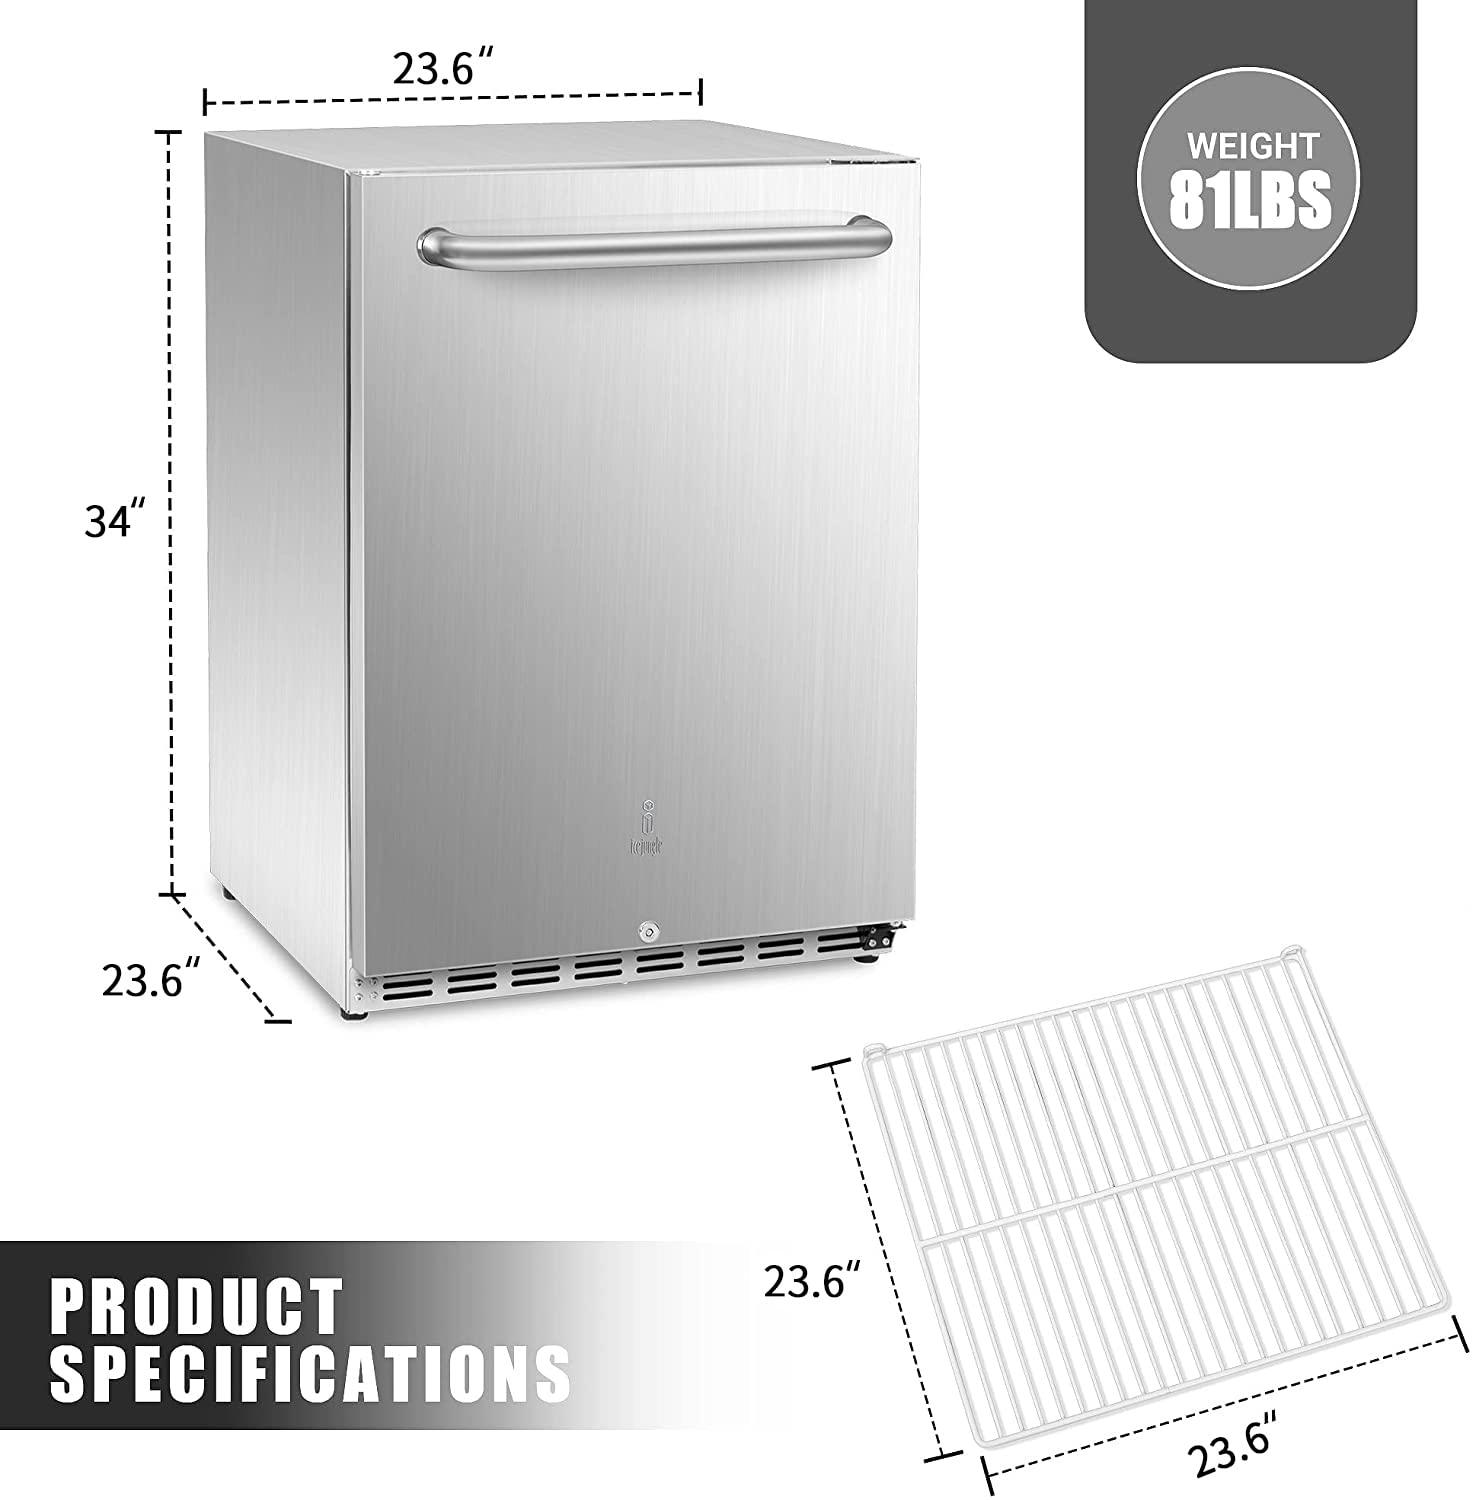 ICEJUNGLE Refrigerator, Single Door, Silver Outdoor Refrigerator 24'' Built-in/Freestanding Compressor Beverage Fridge Refrigerator for Home and Commercial Use - CookCave